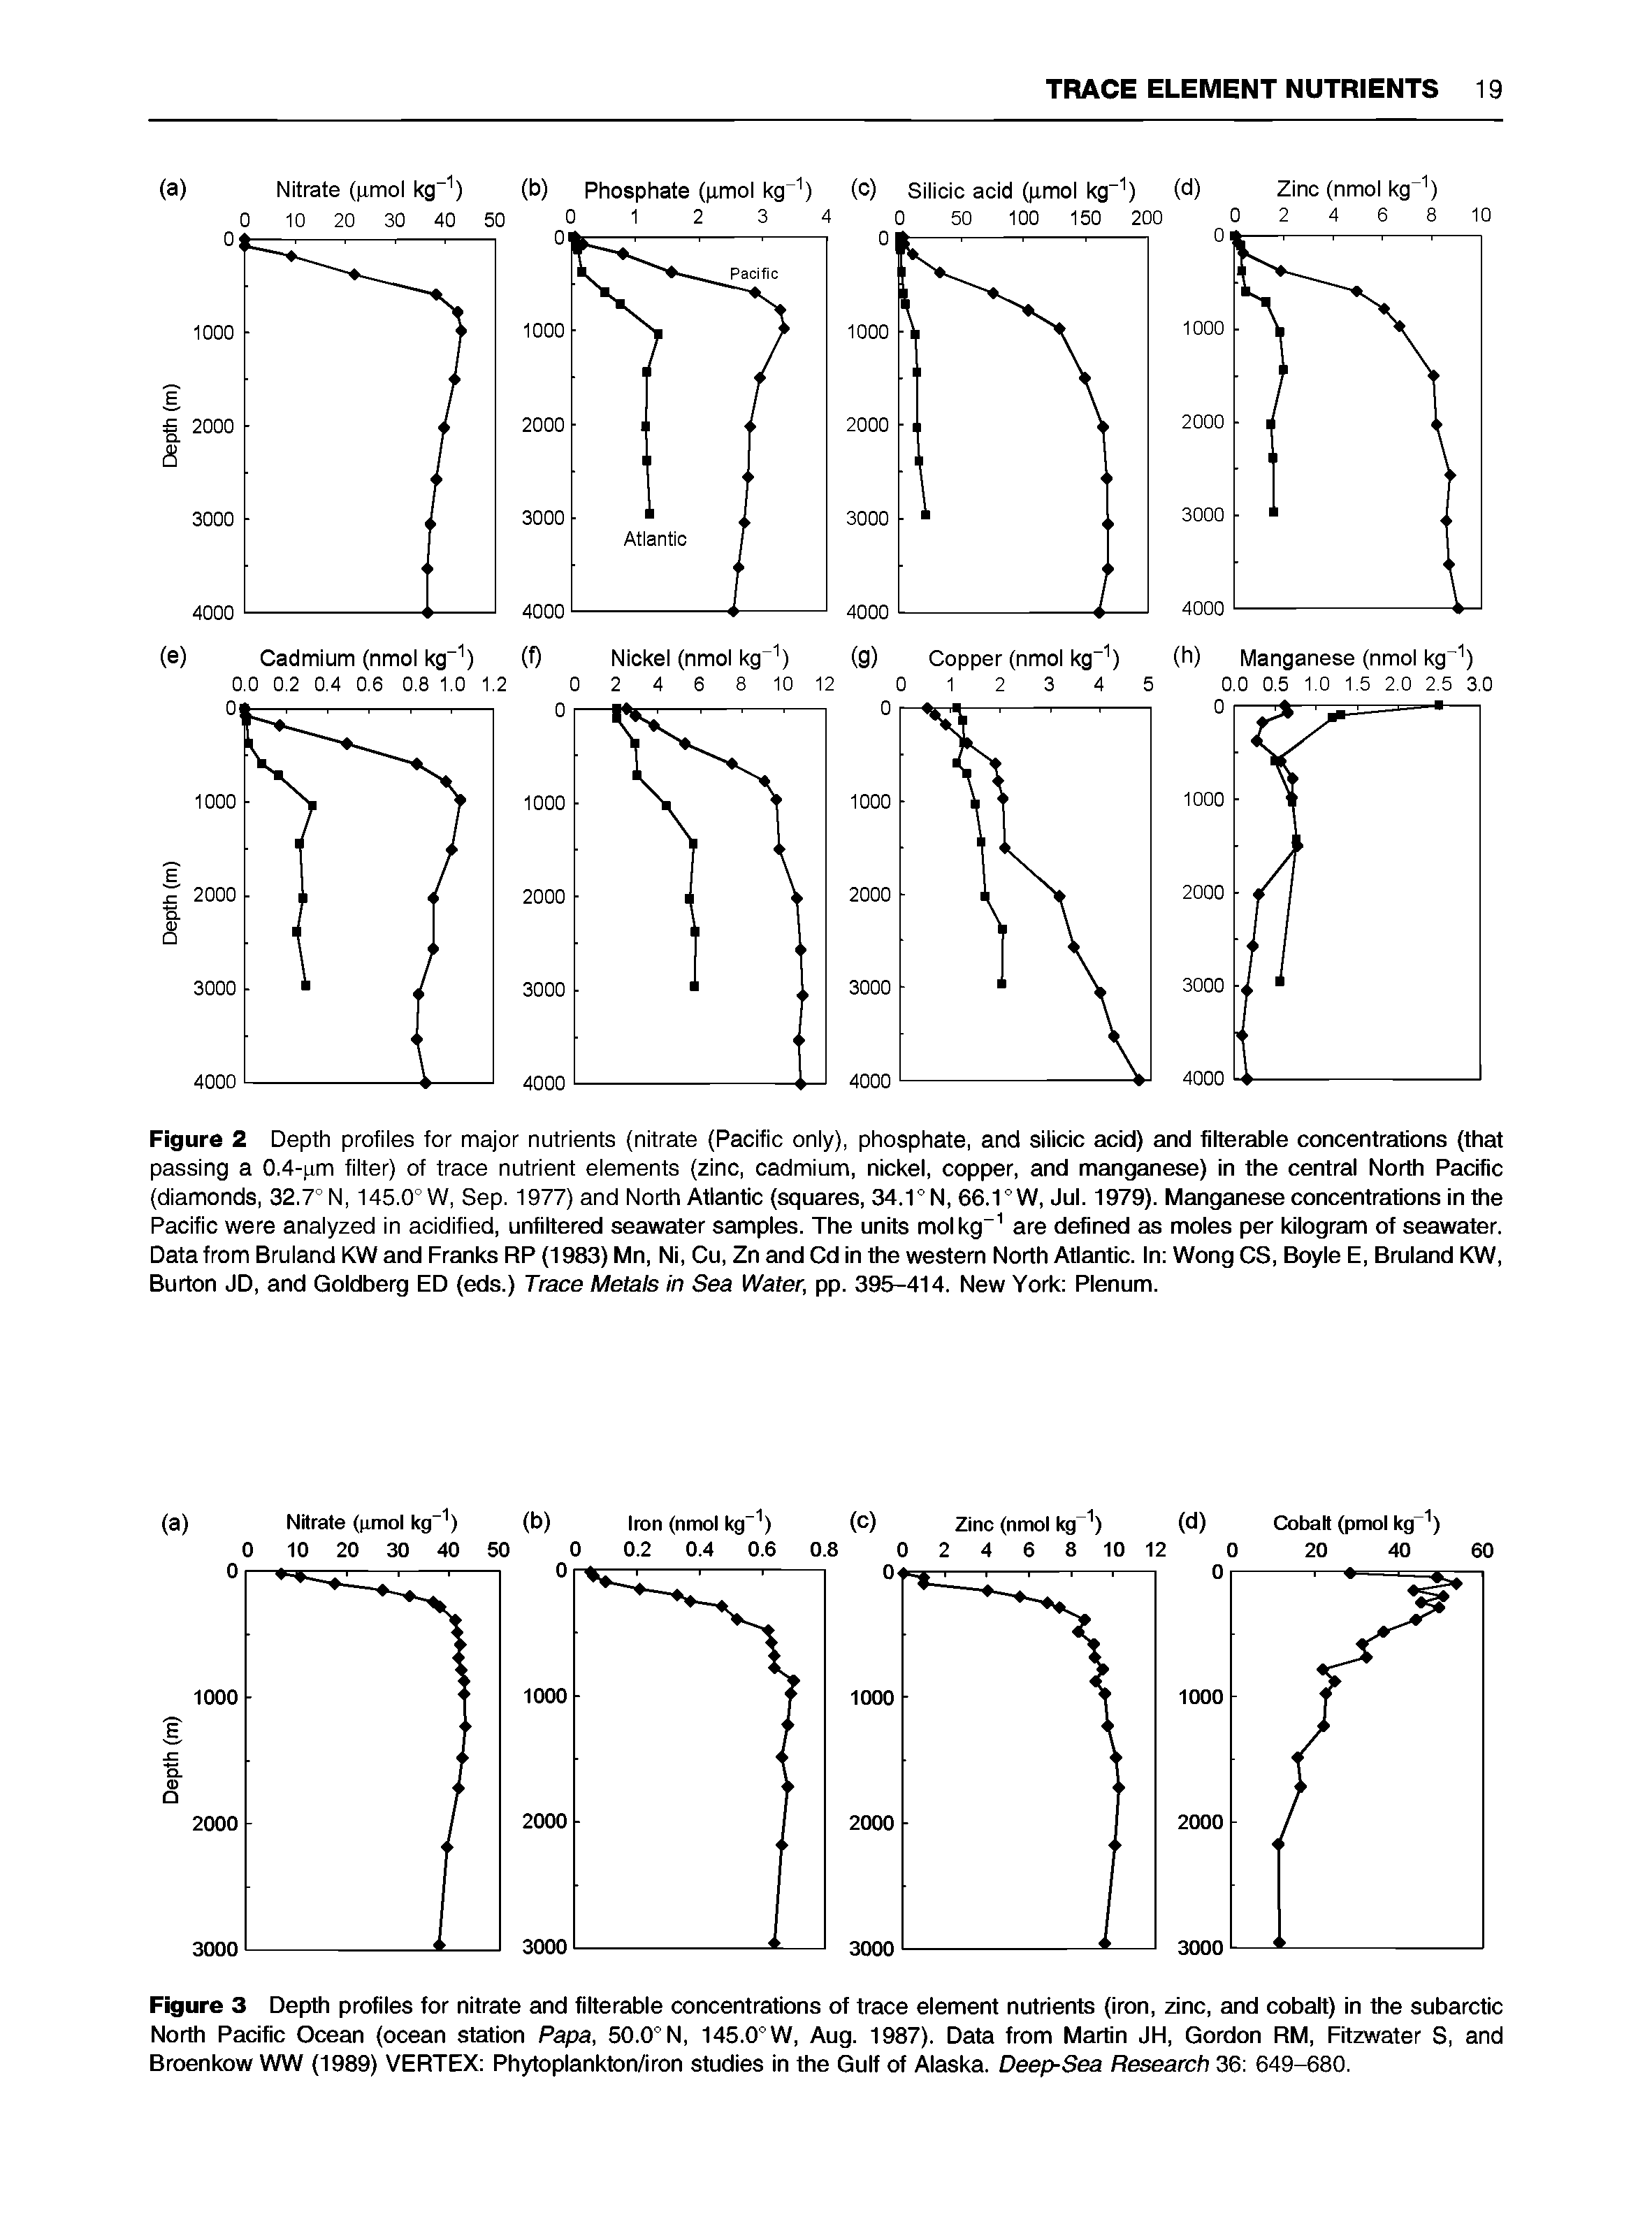 Figure 3 Depth profiles for nitrate and filterable concentrations of trace element nutrients (iron, zinc, and cobalt) in the subarctic North Pacific Ocean (ocean station Papa, 50.0°N, 145.0°W, Aug. 1987). Data from Martin JH, Gordon RM, Fitzwater S, and Broenkow WW (1989) VERTEX Phytoplankton/iron studies in the Gulf of Alaska. Deep-Sea Research 36 649-680.